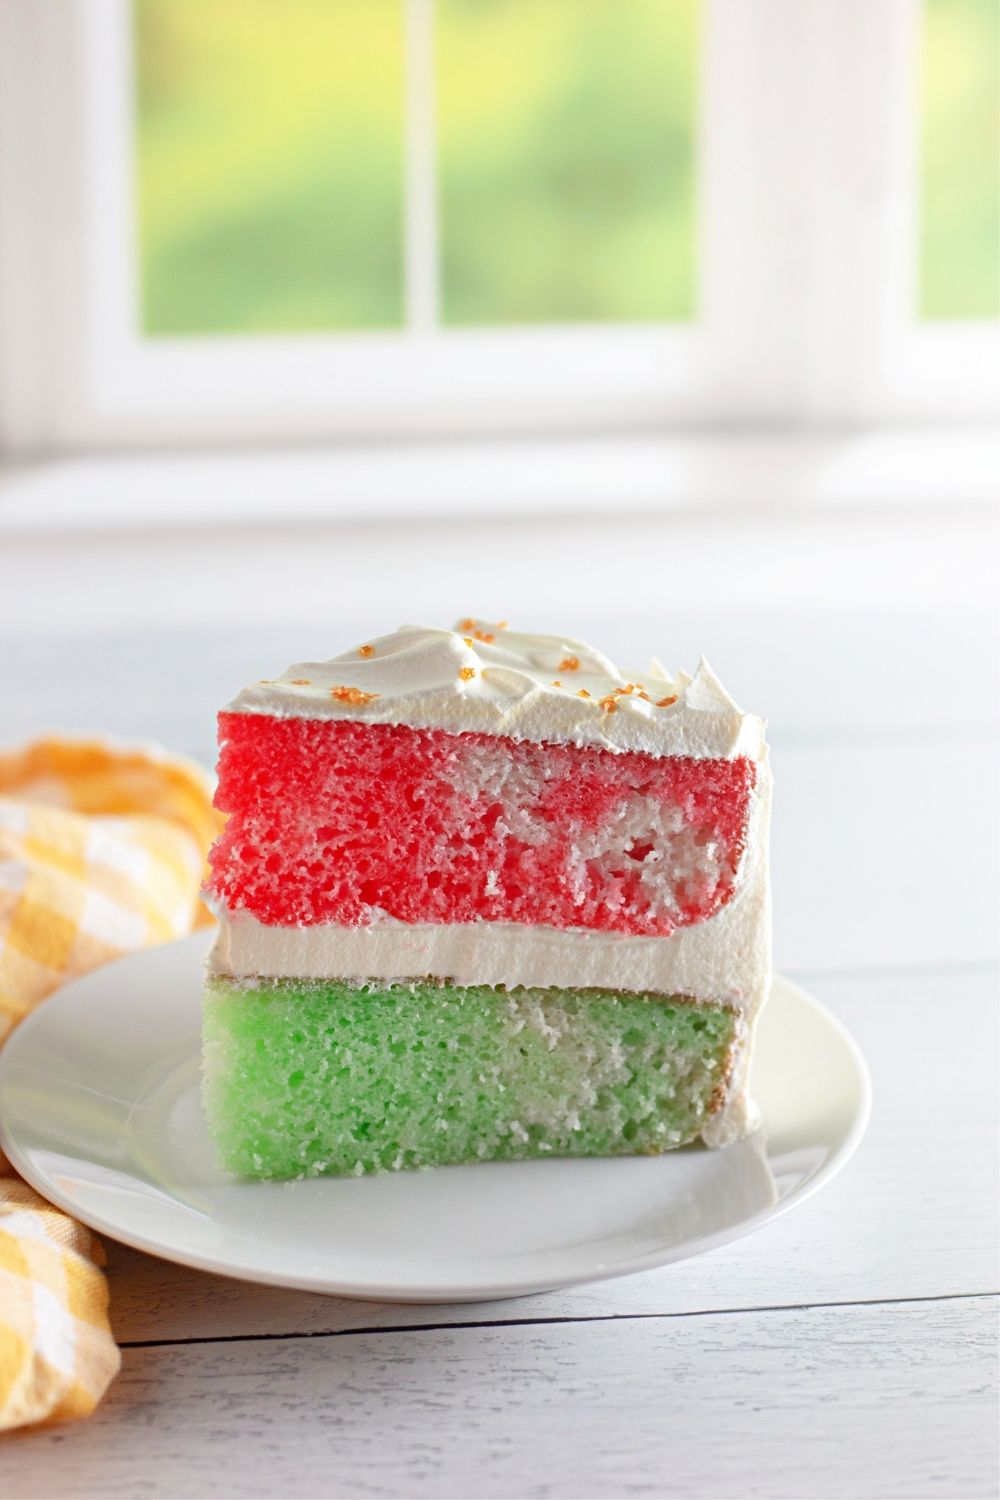 A slice of red and green Jello cake